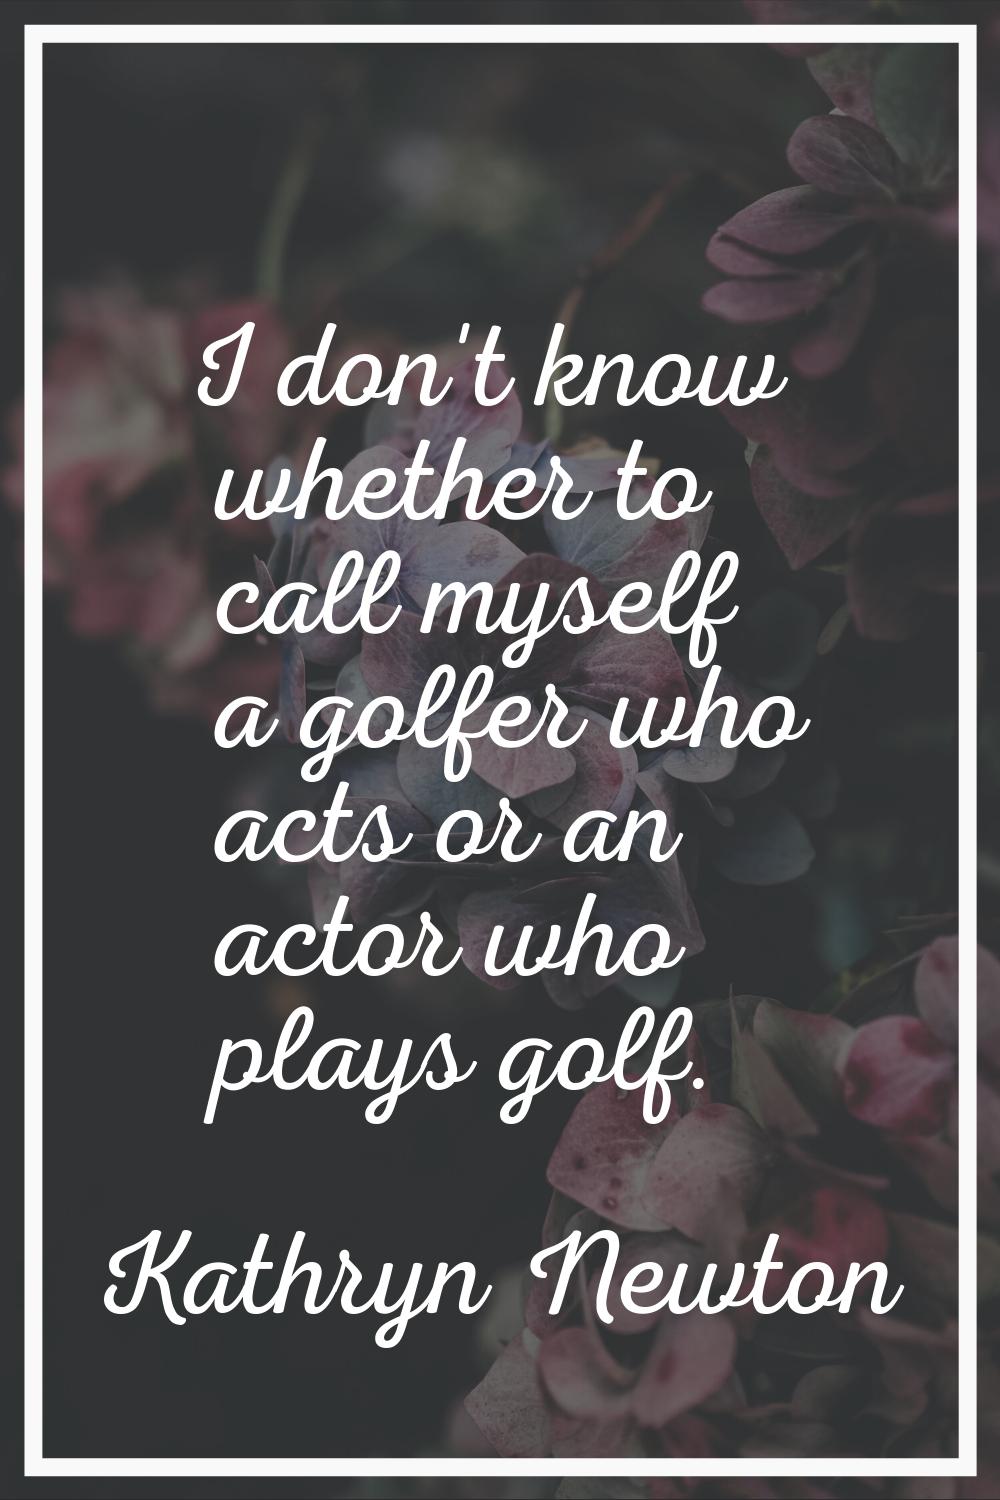 I don't know whether to call myself a golfer who acts or an actor who plays golf.